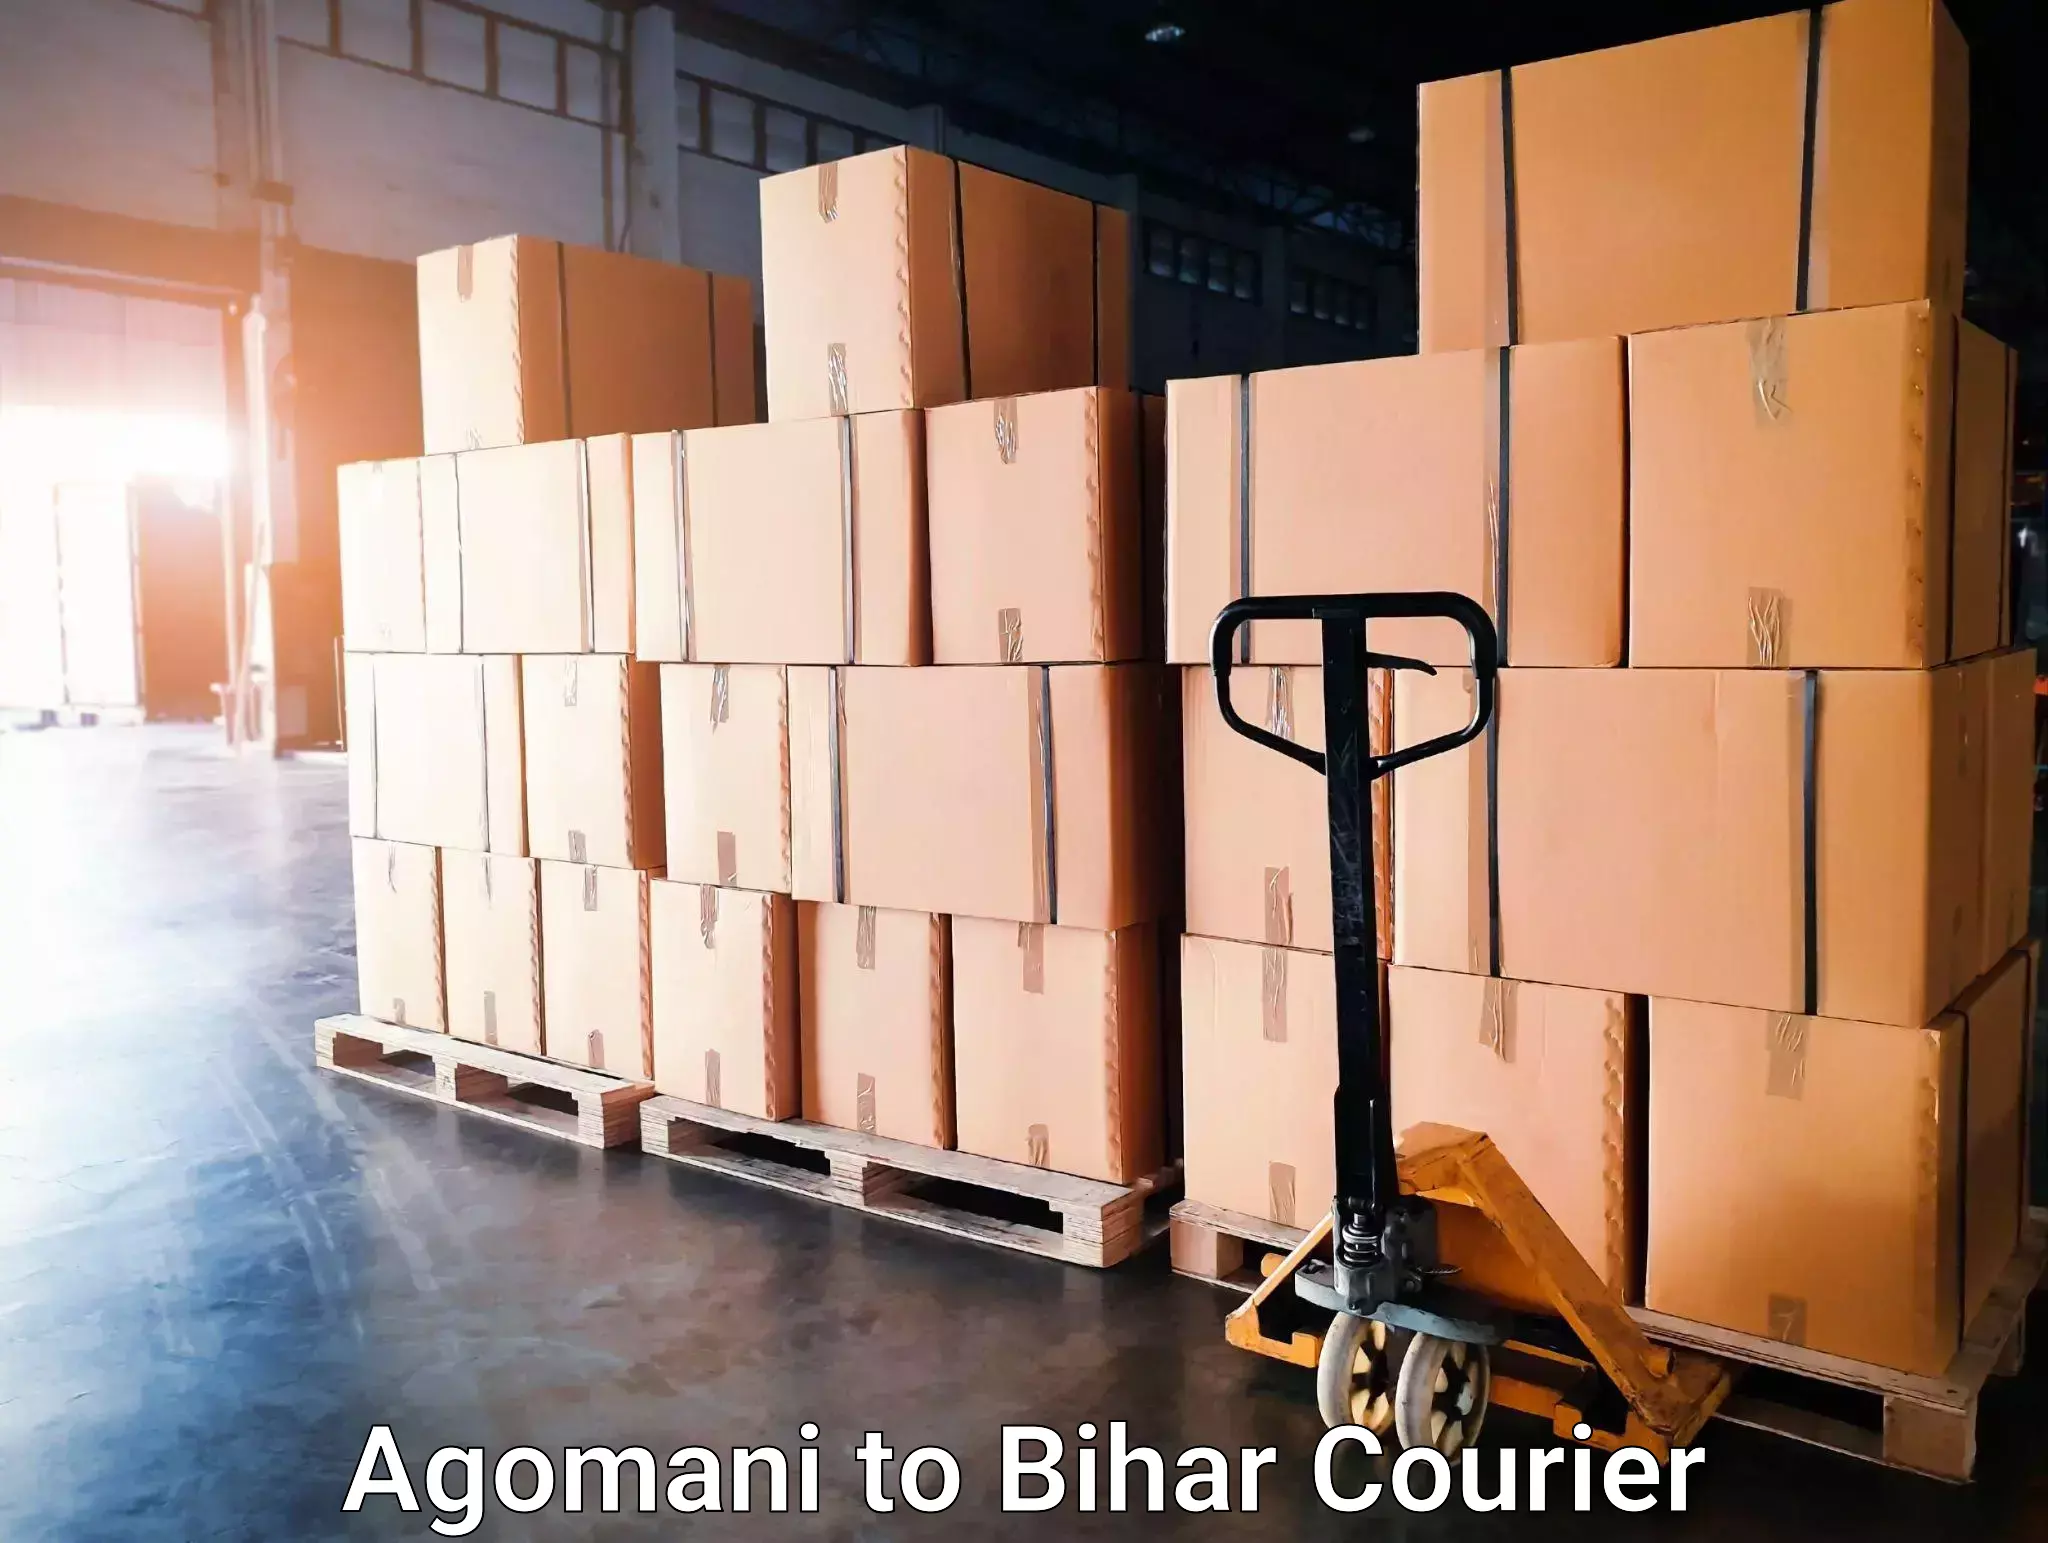 Courier service innovation in Agomani to Sherghati